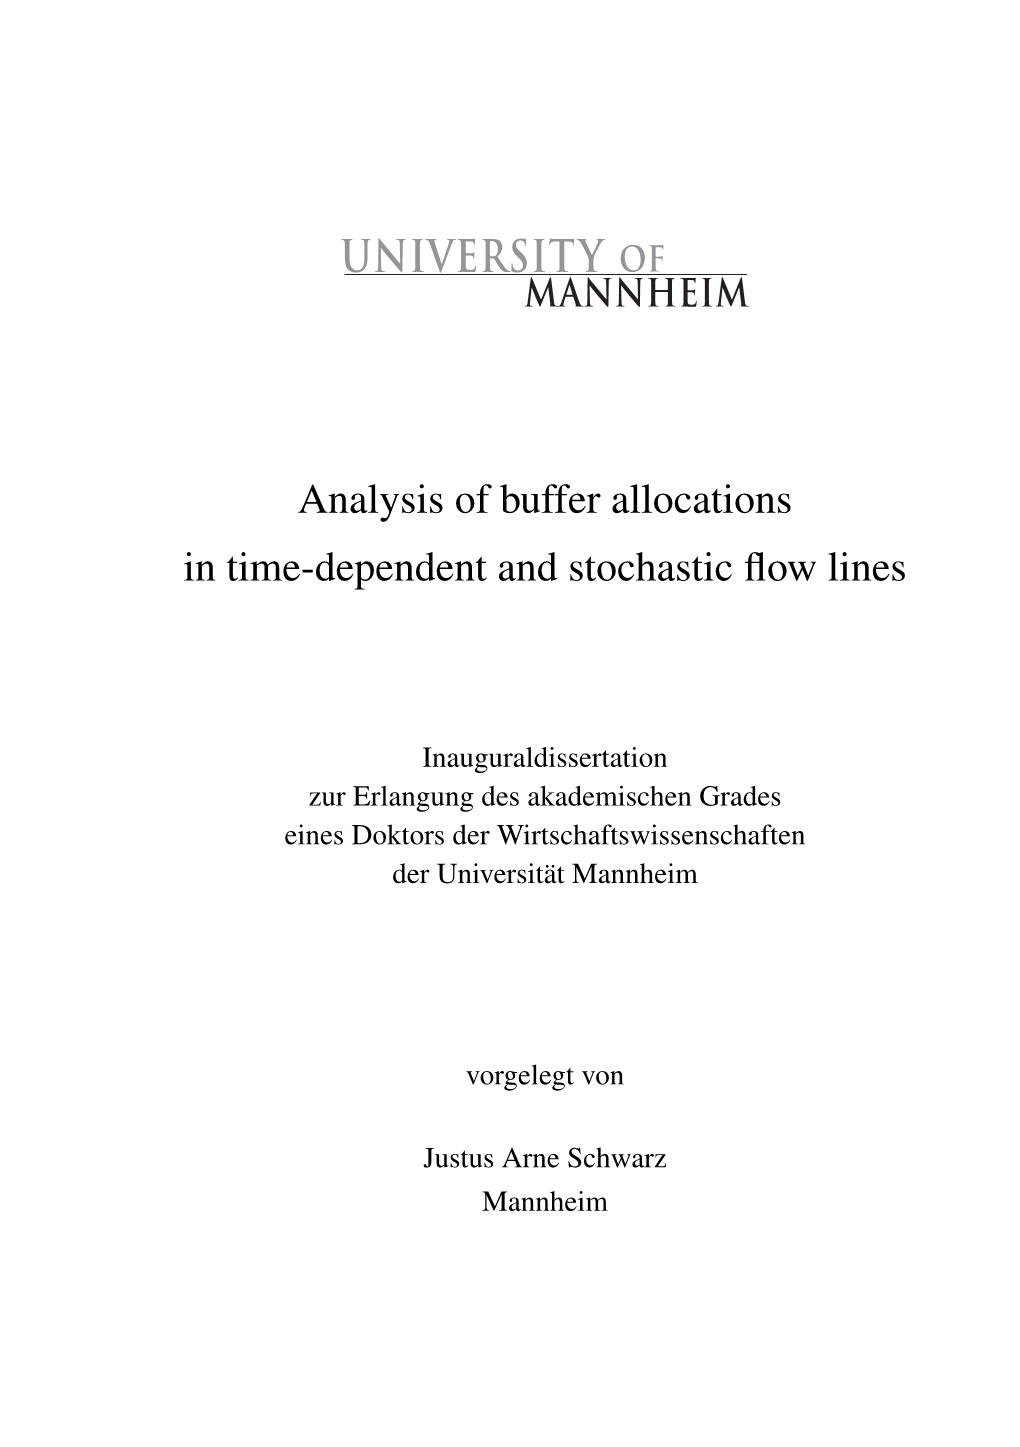 Analysis of Buffer Allocations in Time-Dependent and Stochastic Flow